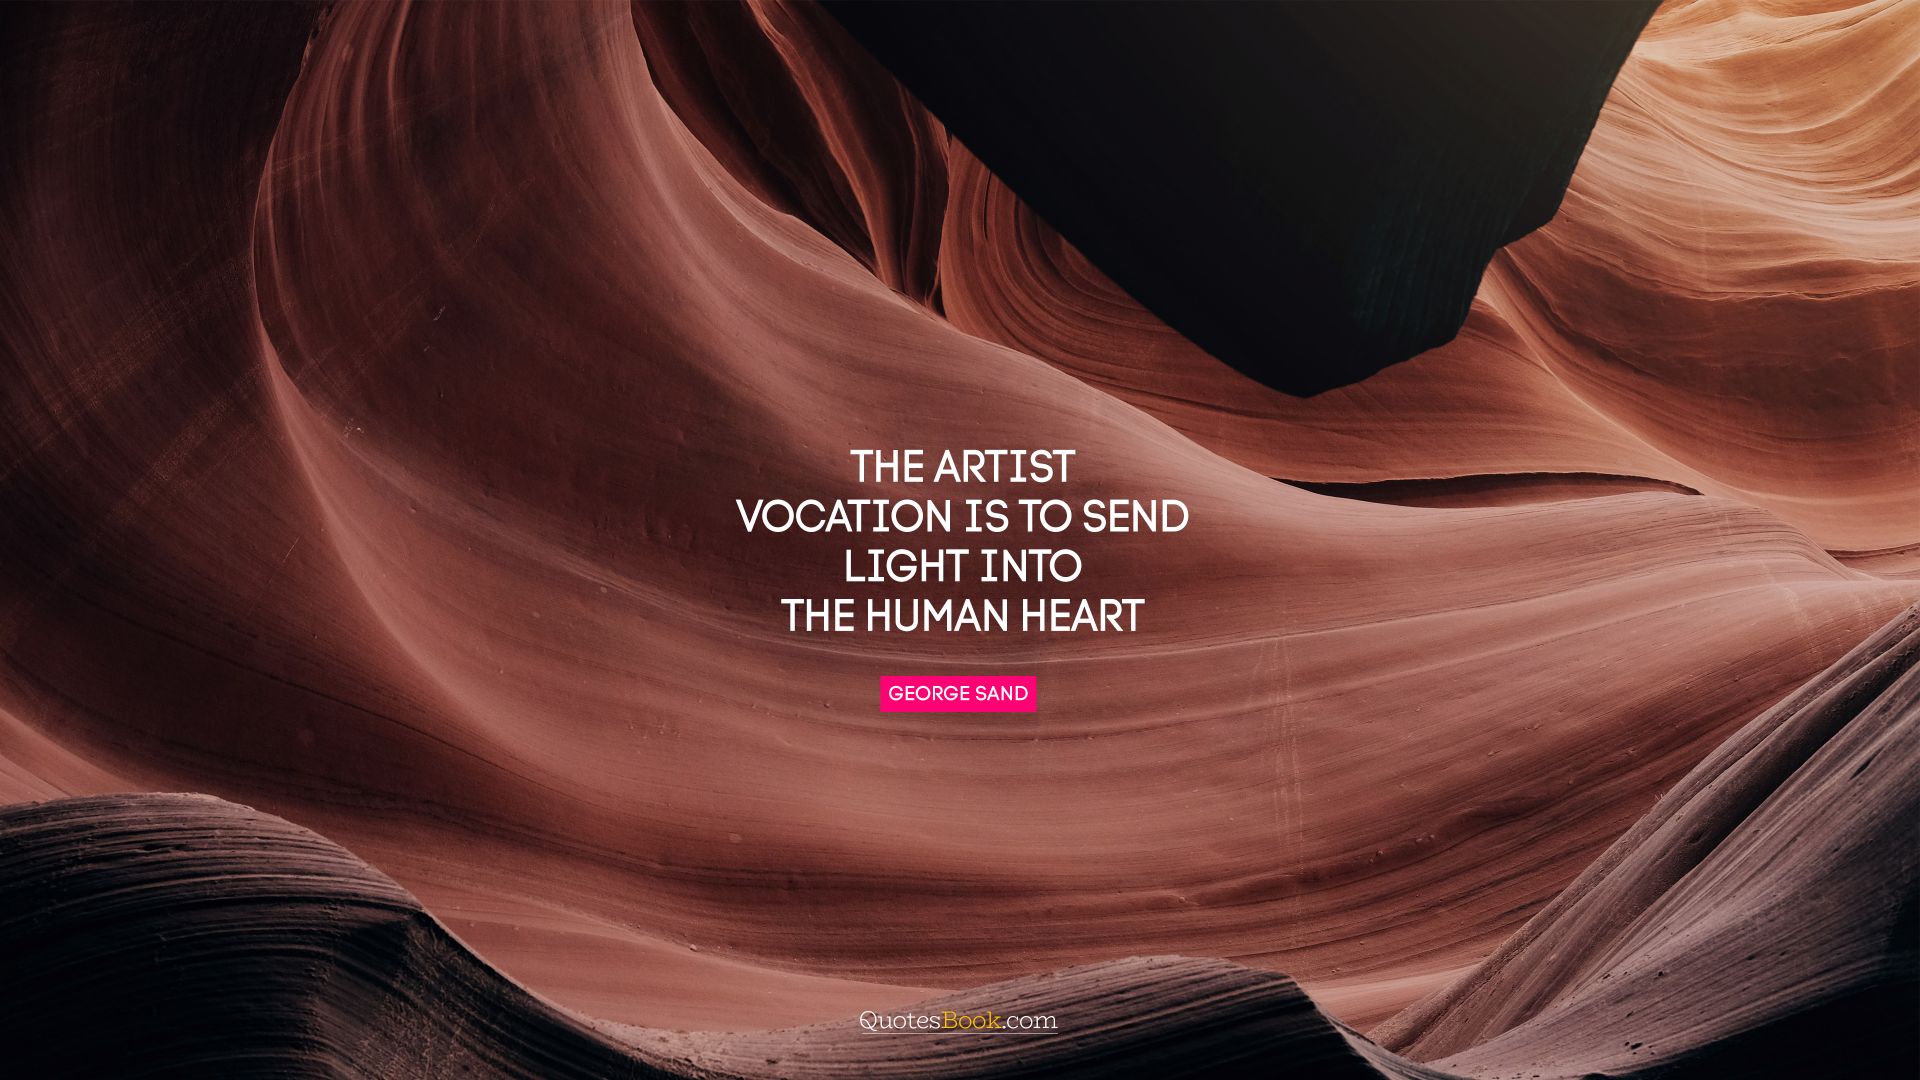 The artist vocation is to send light into the human heart. - Quote by George Sand